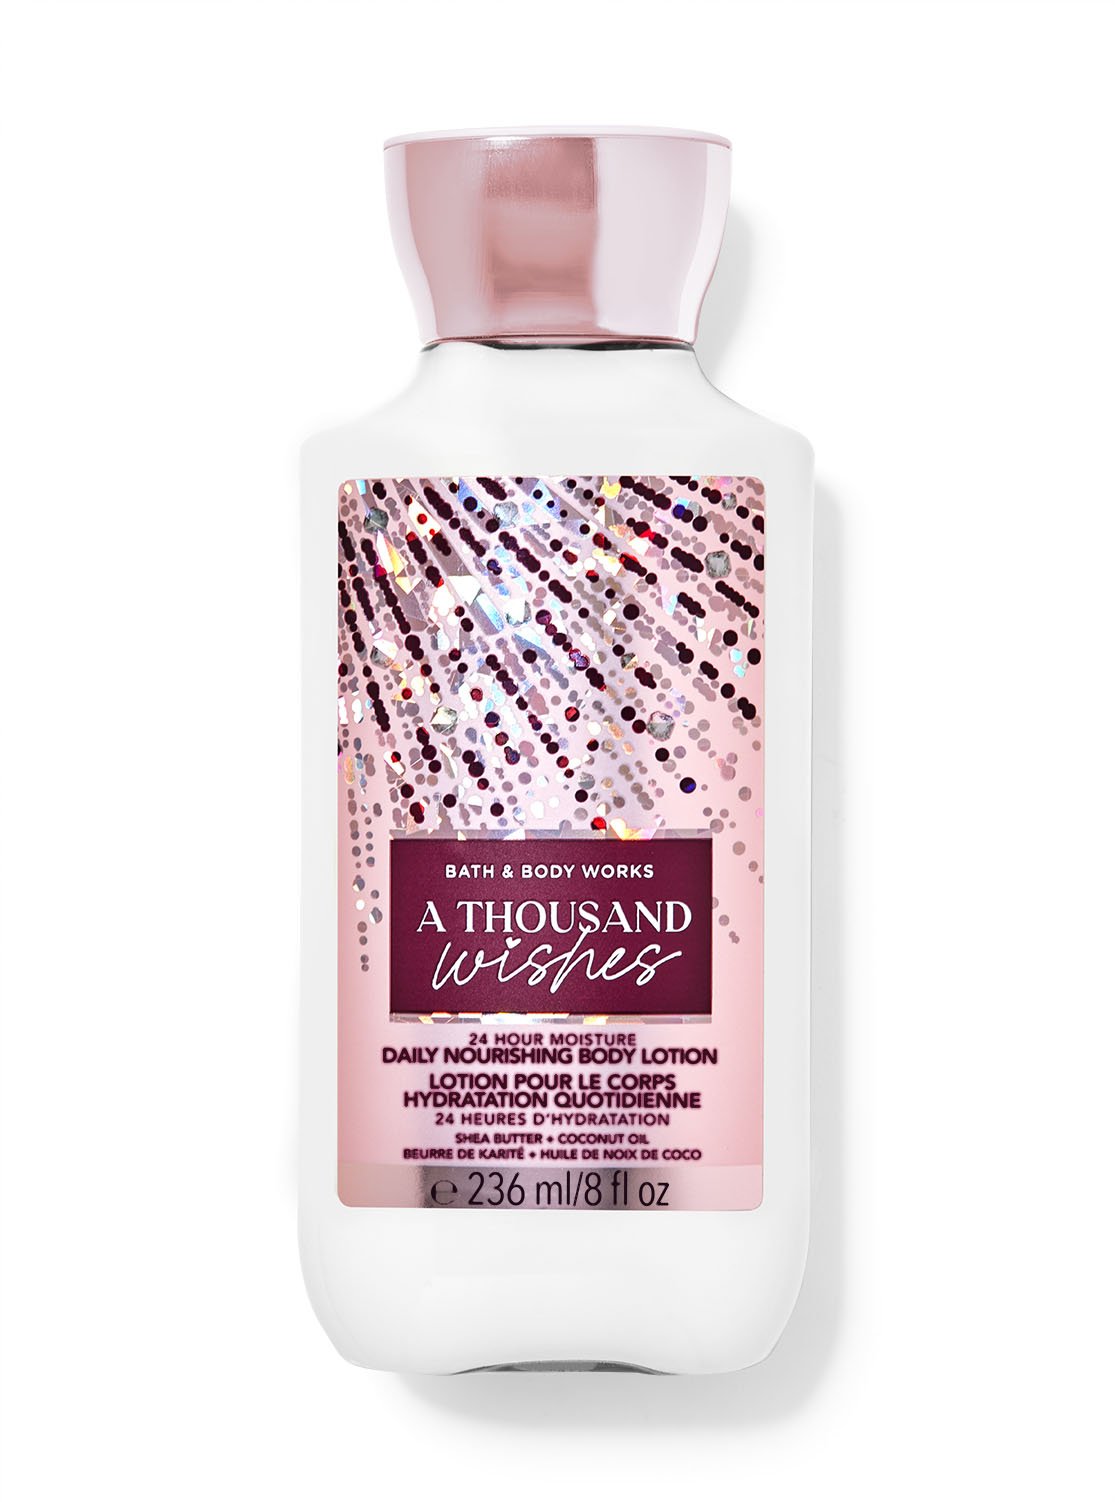 A Thousand Wishes Daily Nourishing Body Lotion | Bath and Body Works